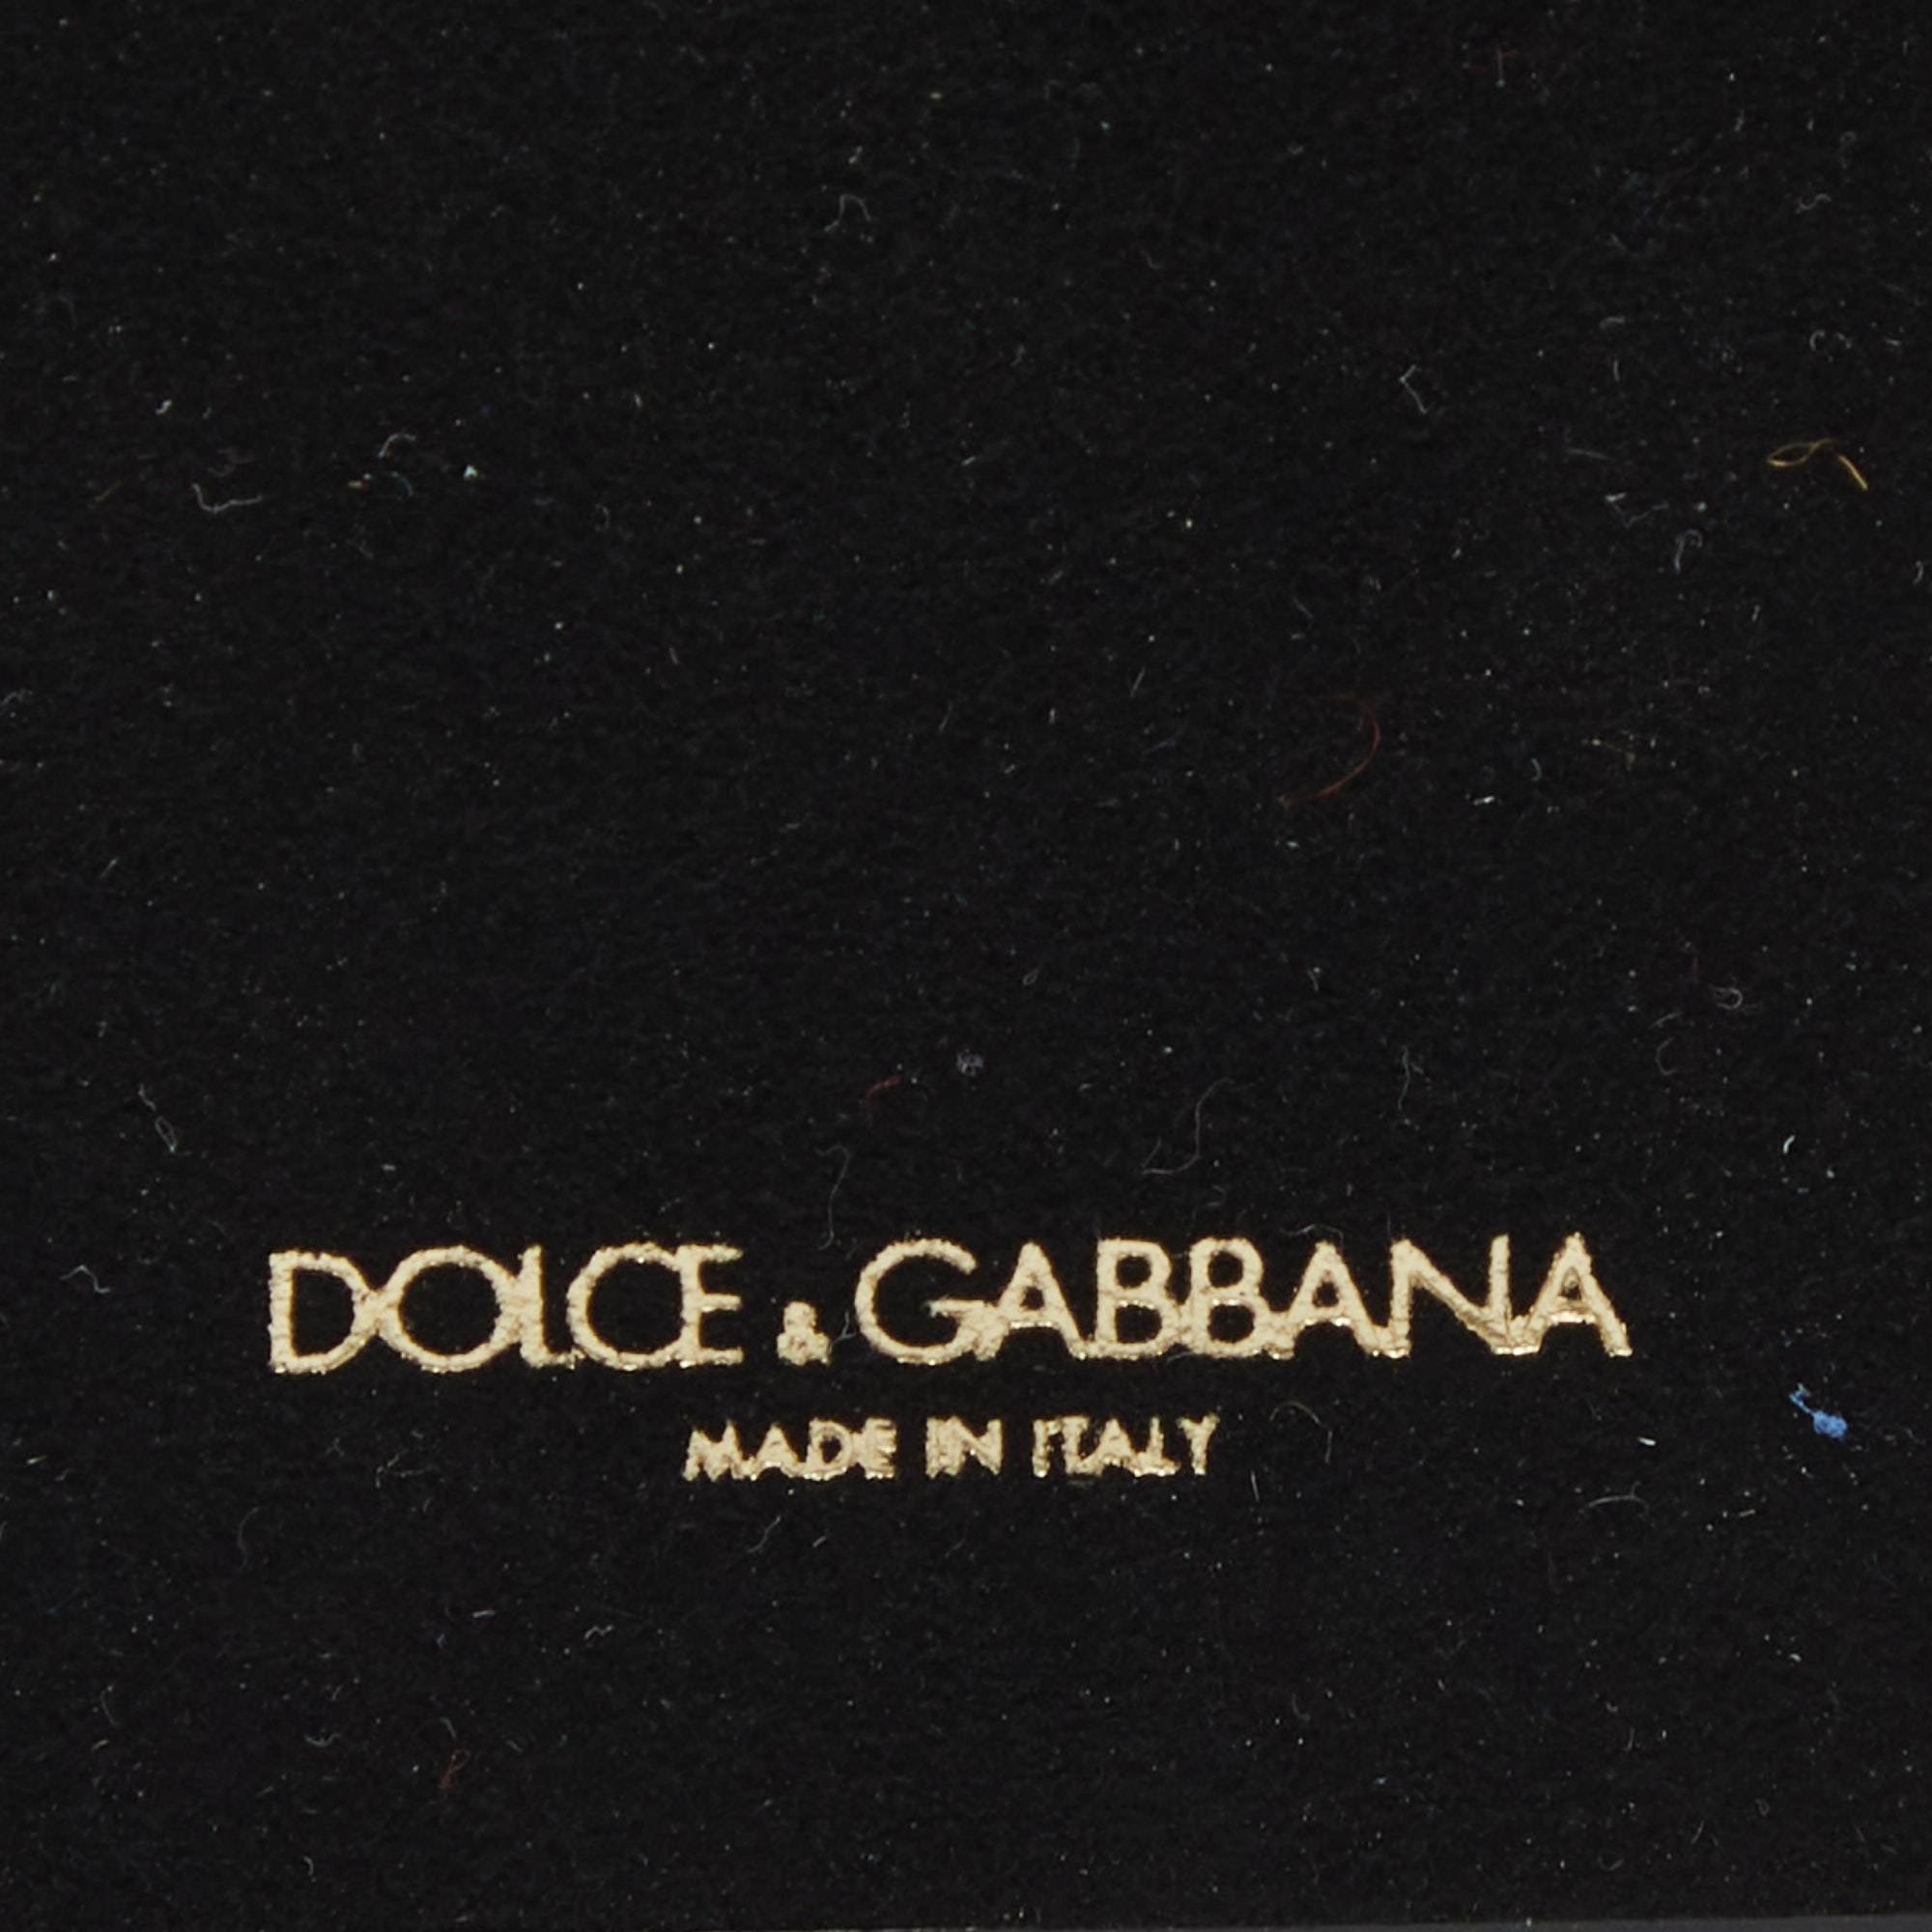 Dolce & Gabbana Blue Leather Embellished IPhone 6 Cover